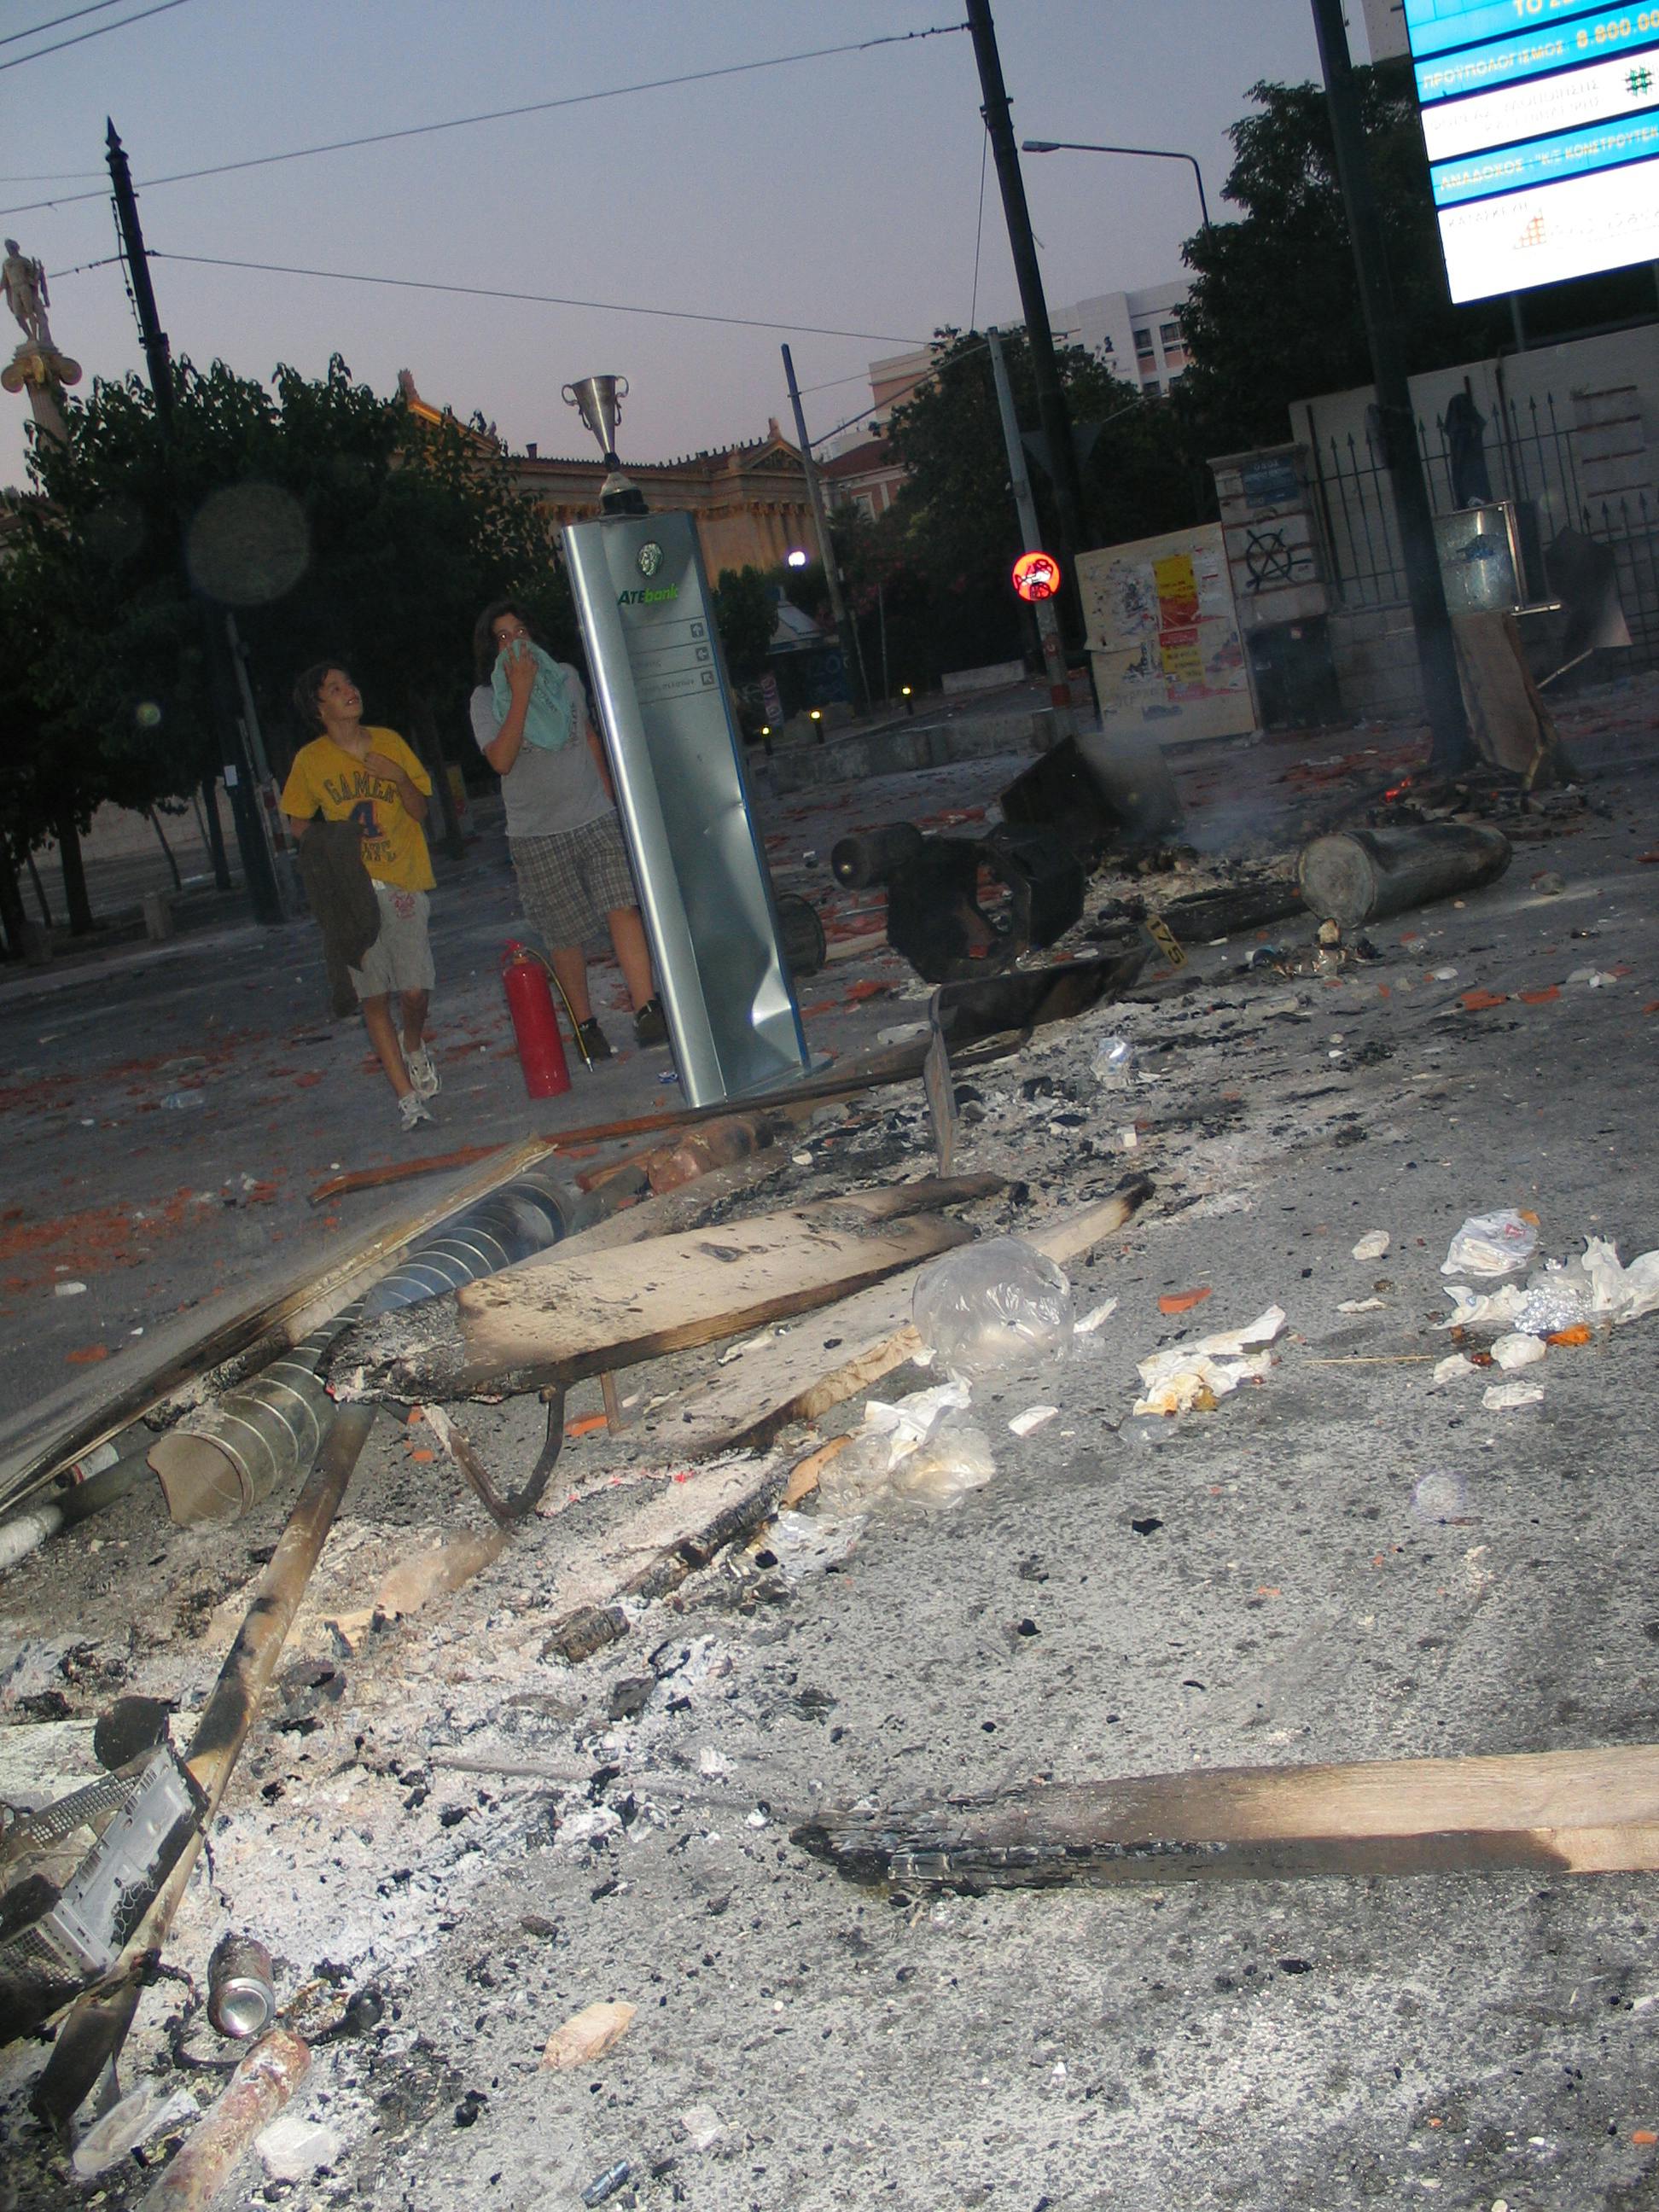 Free stock photo of after the riots, Athens June 2011